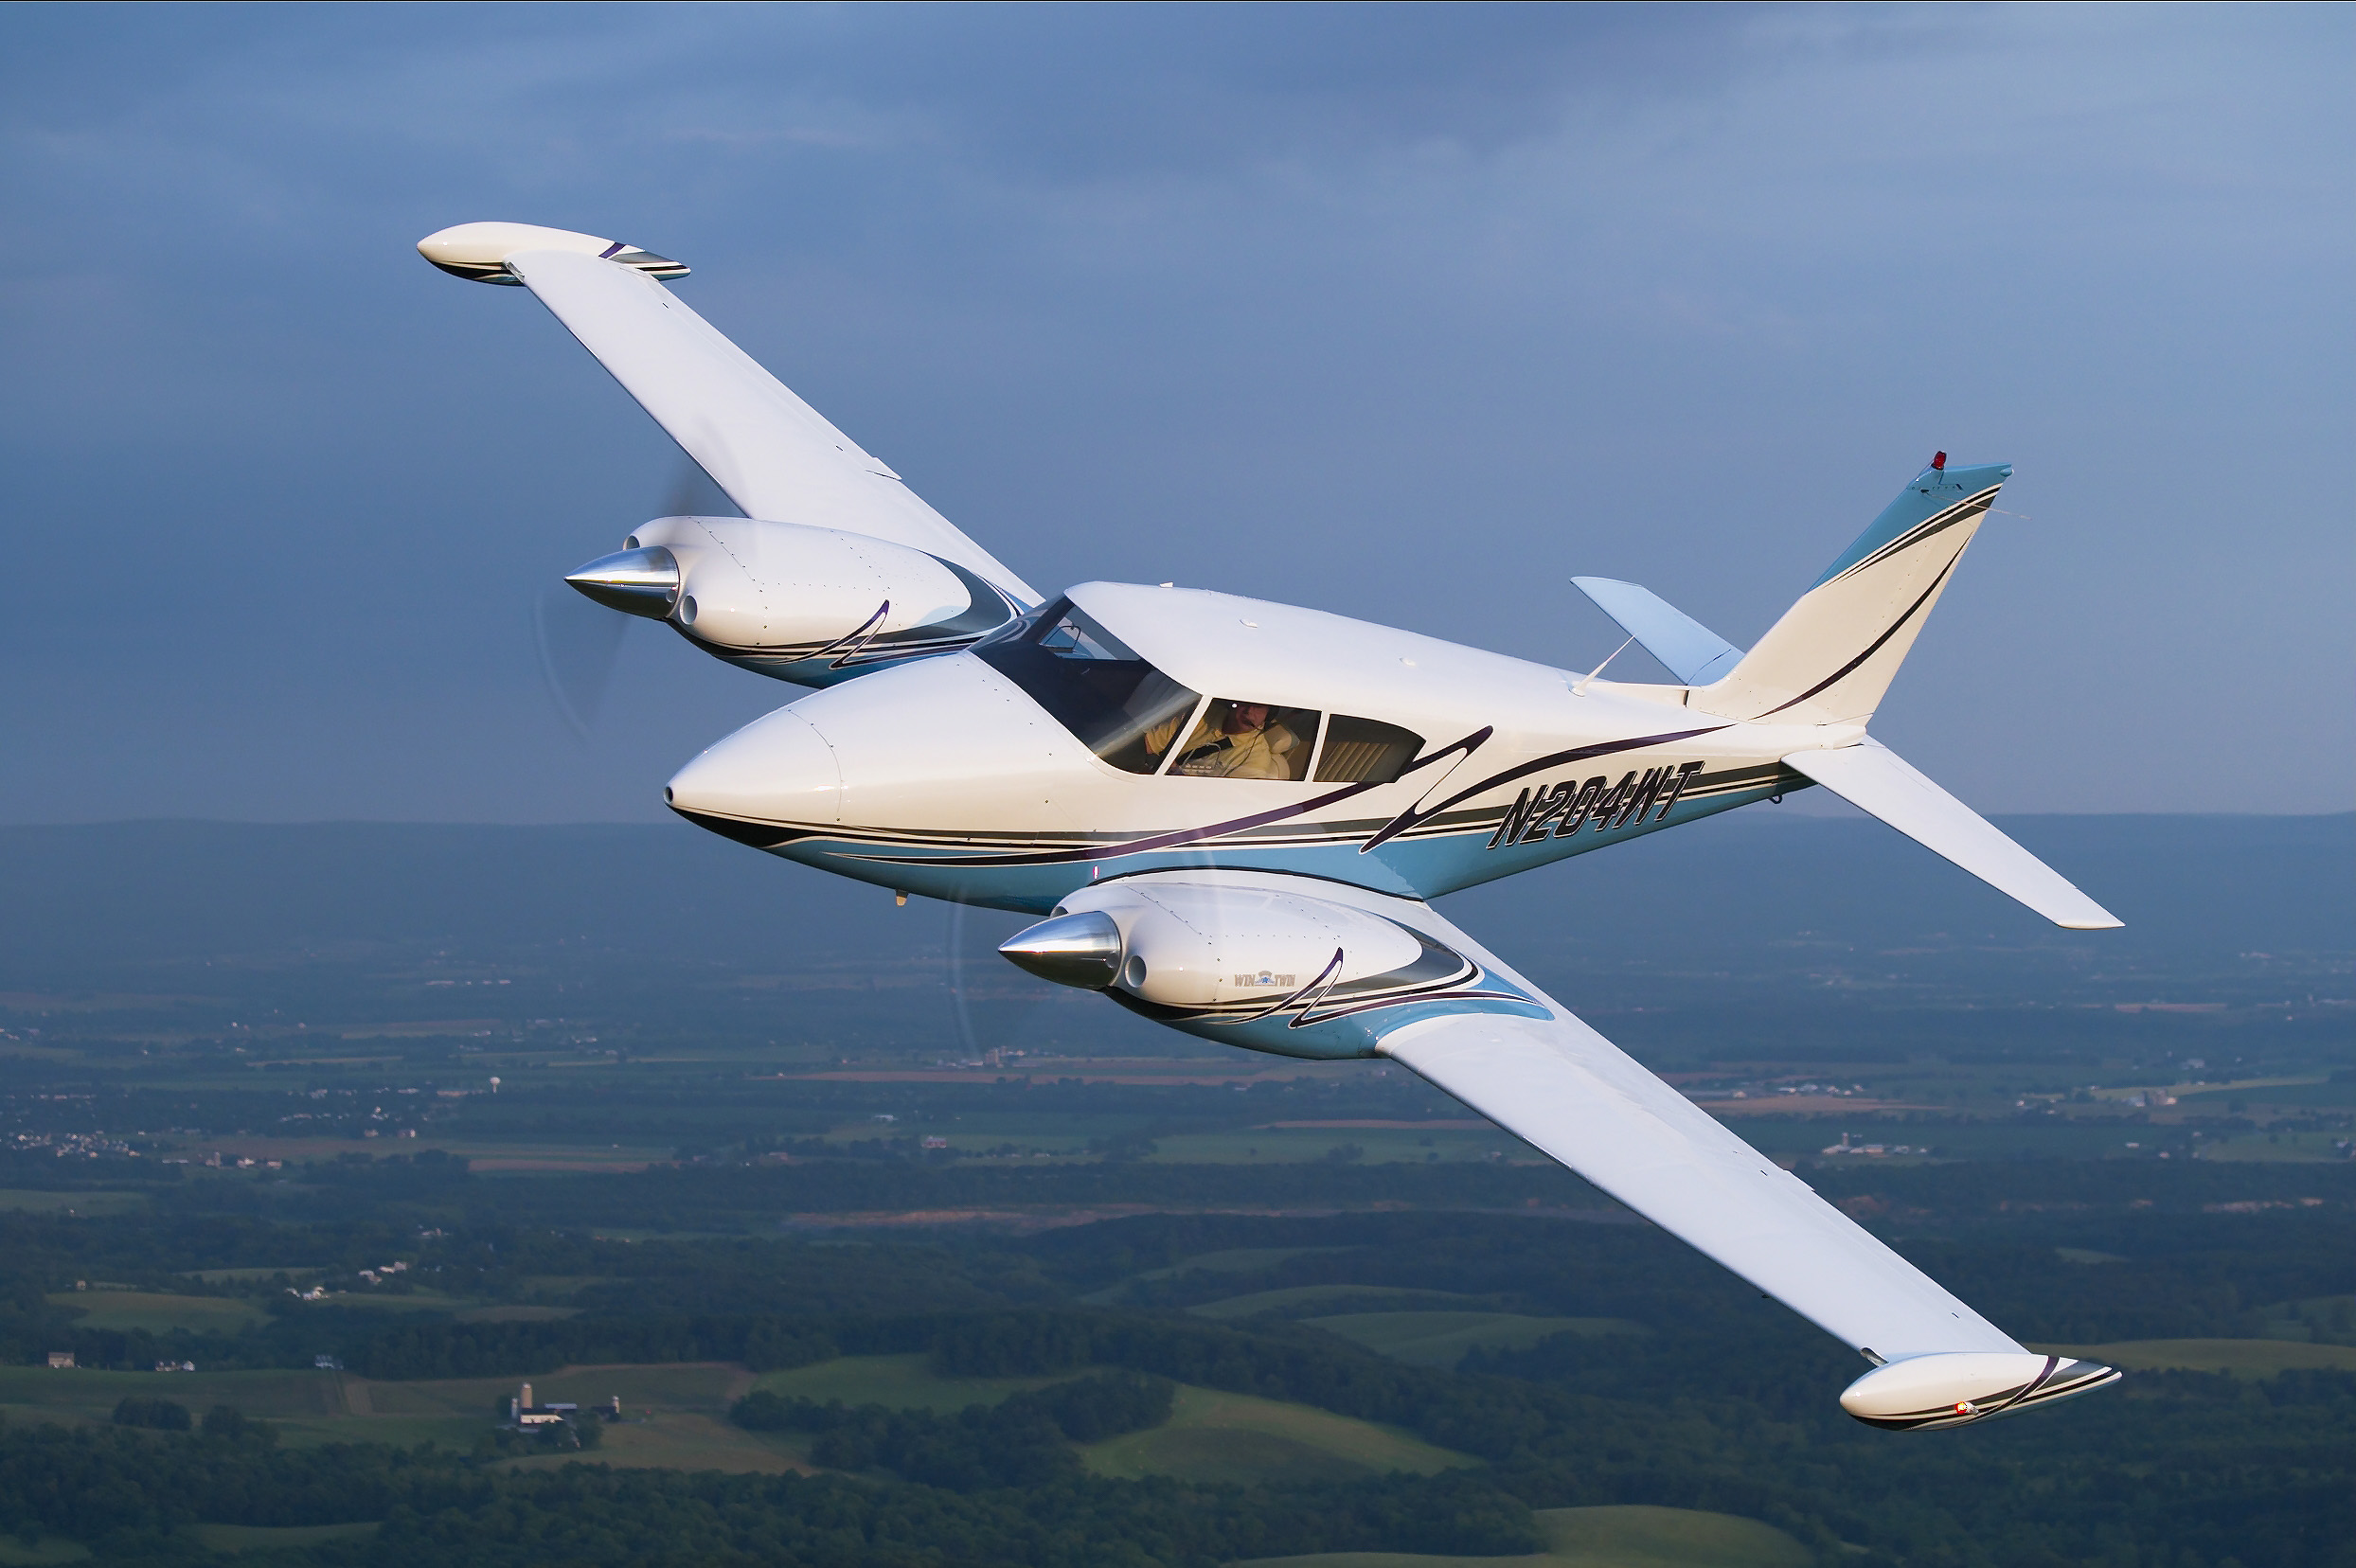 Pilots who follow the necessary steps can fly in aircraft weighing up to 6,000 lbs. gross takeoff weight, with up to six seats and carrying up to five passengers. They can fly day or night, VFR or IFR, at speeds up to 250 kts and at altitudes up to 18,000 feet msl. 